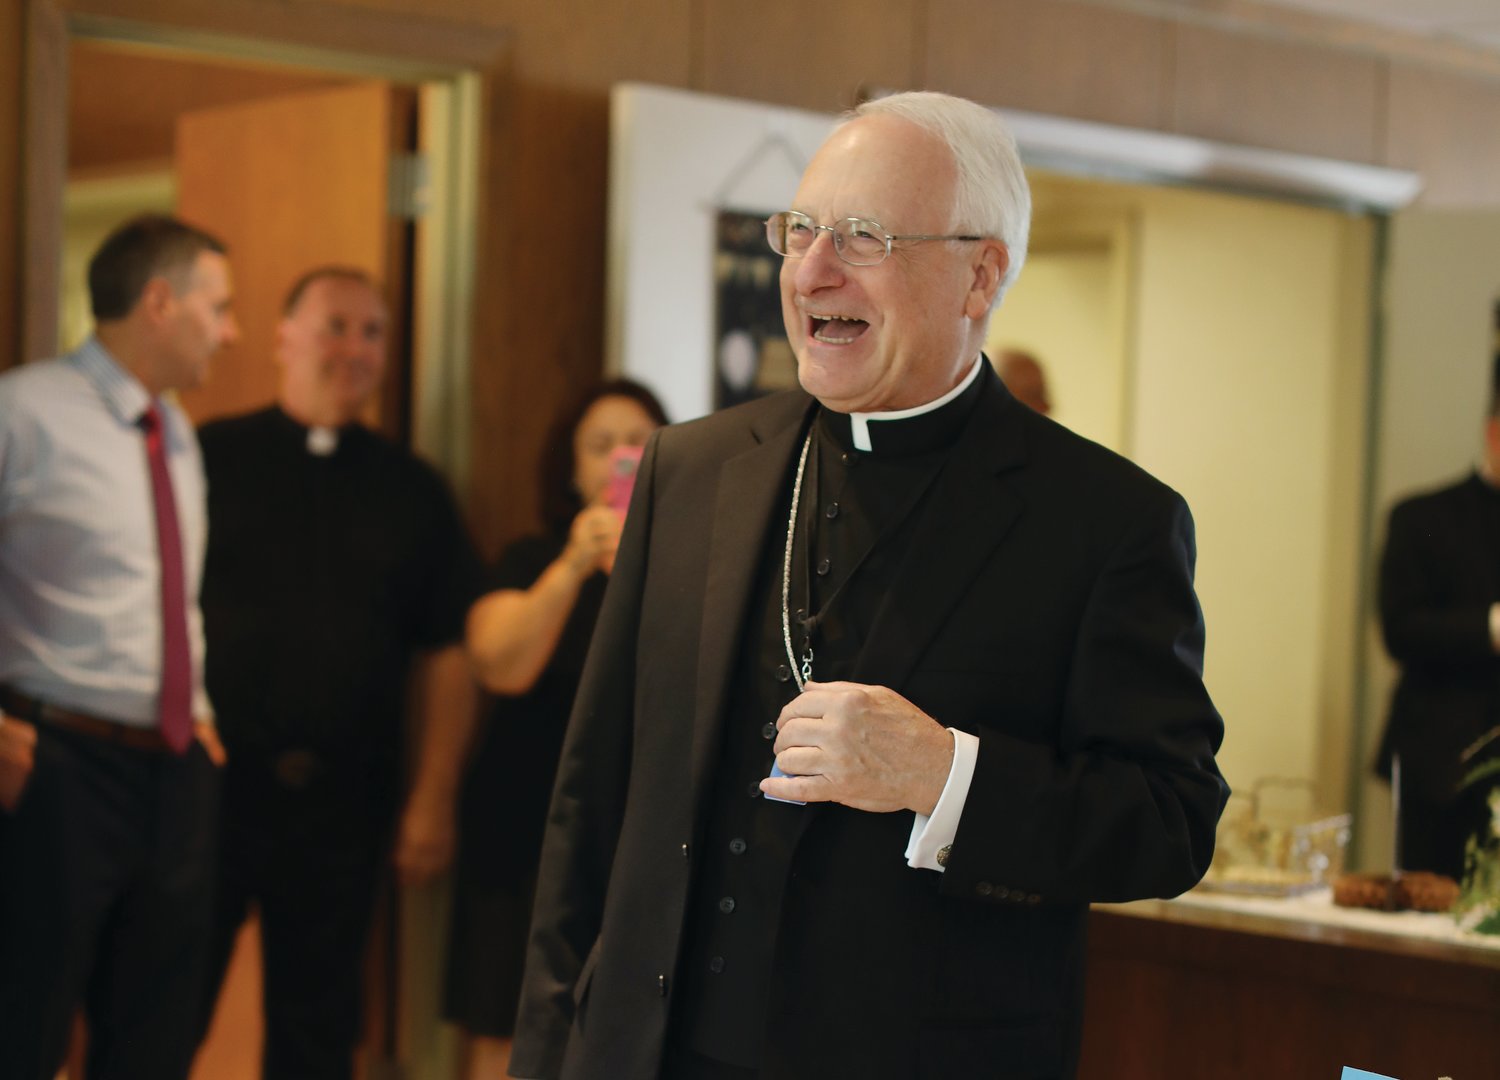 On Sept. 1, Bishop Thomas J. Tobin marked Bishop Robert C. Evans’ 75th birthday by hosting a gathering for cake in his chancery office. During the party, Bishop Tobin offered his birthday wishes and prayers for Bishop Evans, thanking him for his many years of service to the Diocese of Providence.